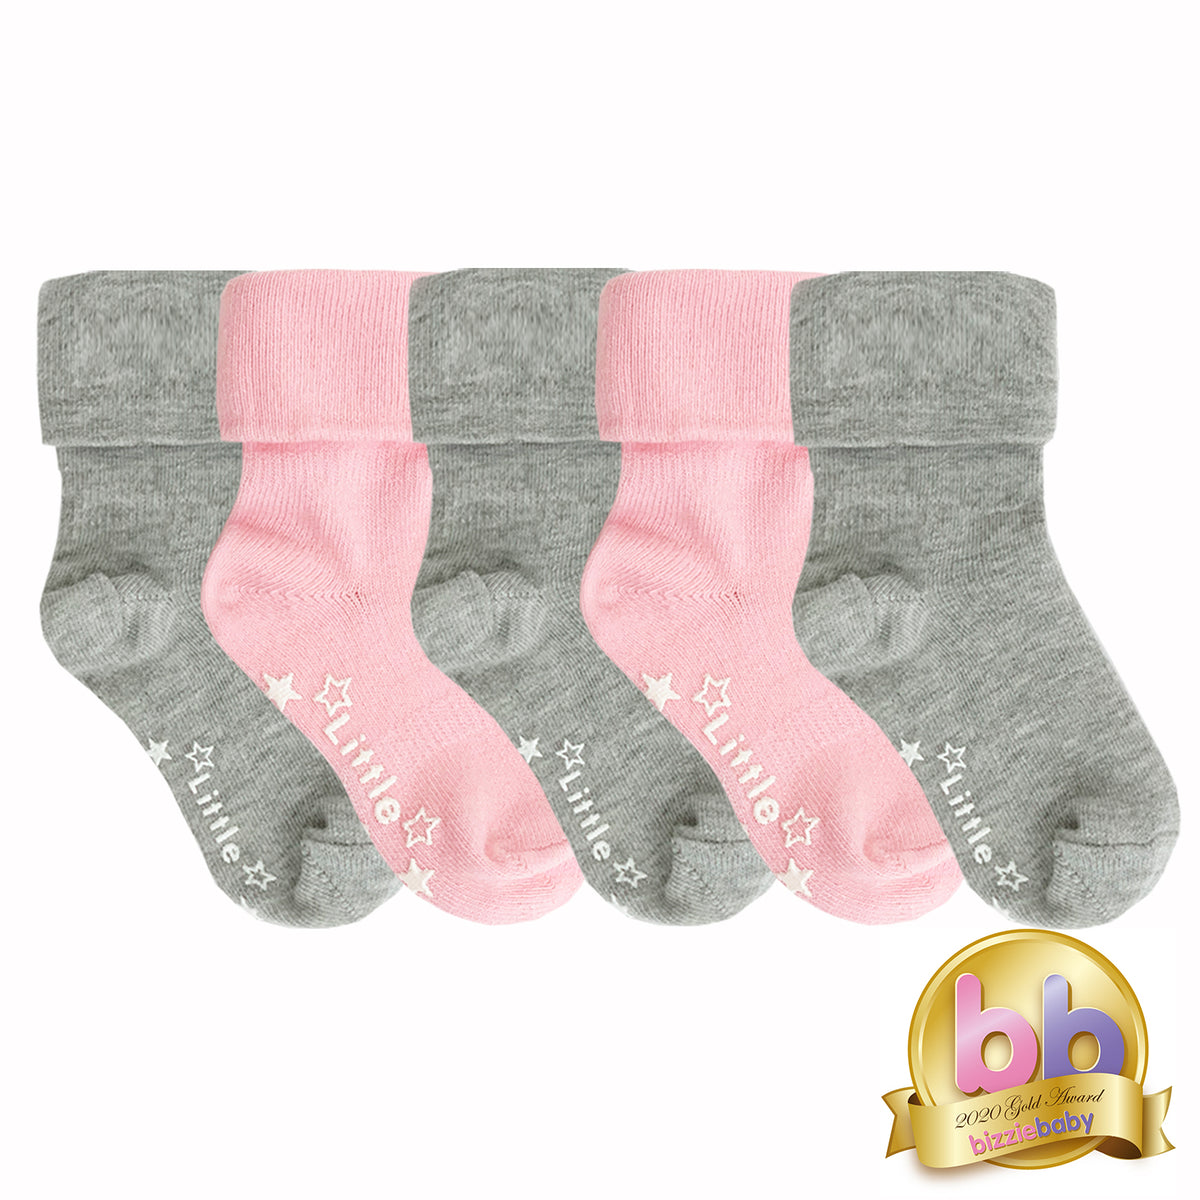 Non-Slip Stay on Baby and Toddler Socks - 5 Pack in Fairy Tale Pink and Grey